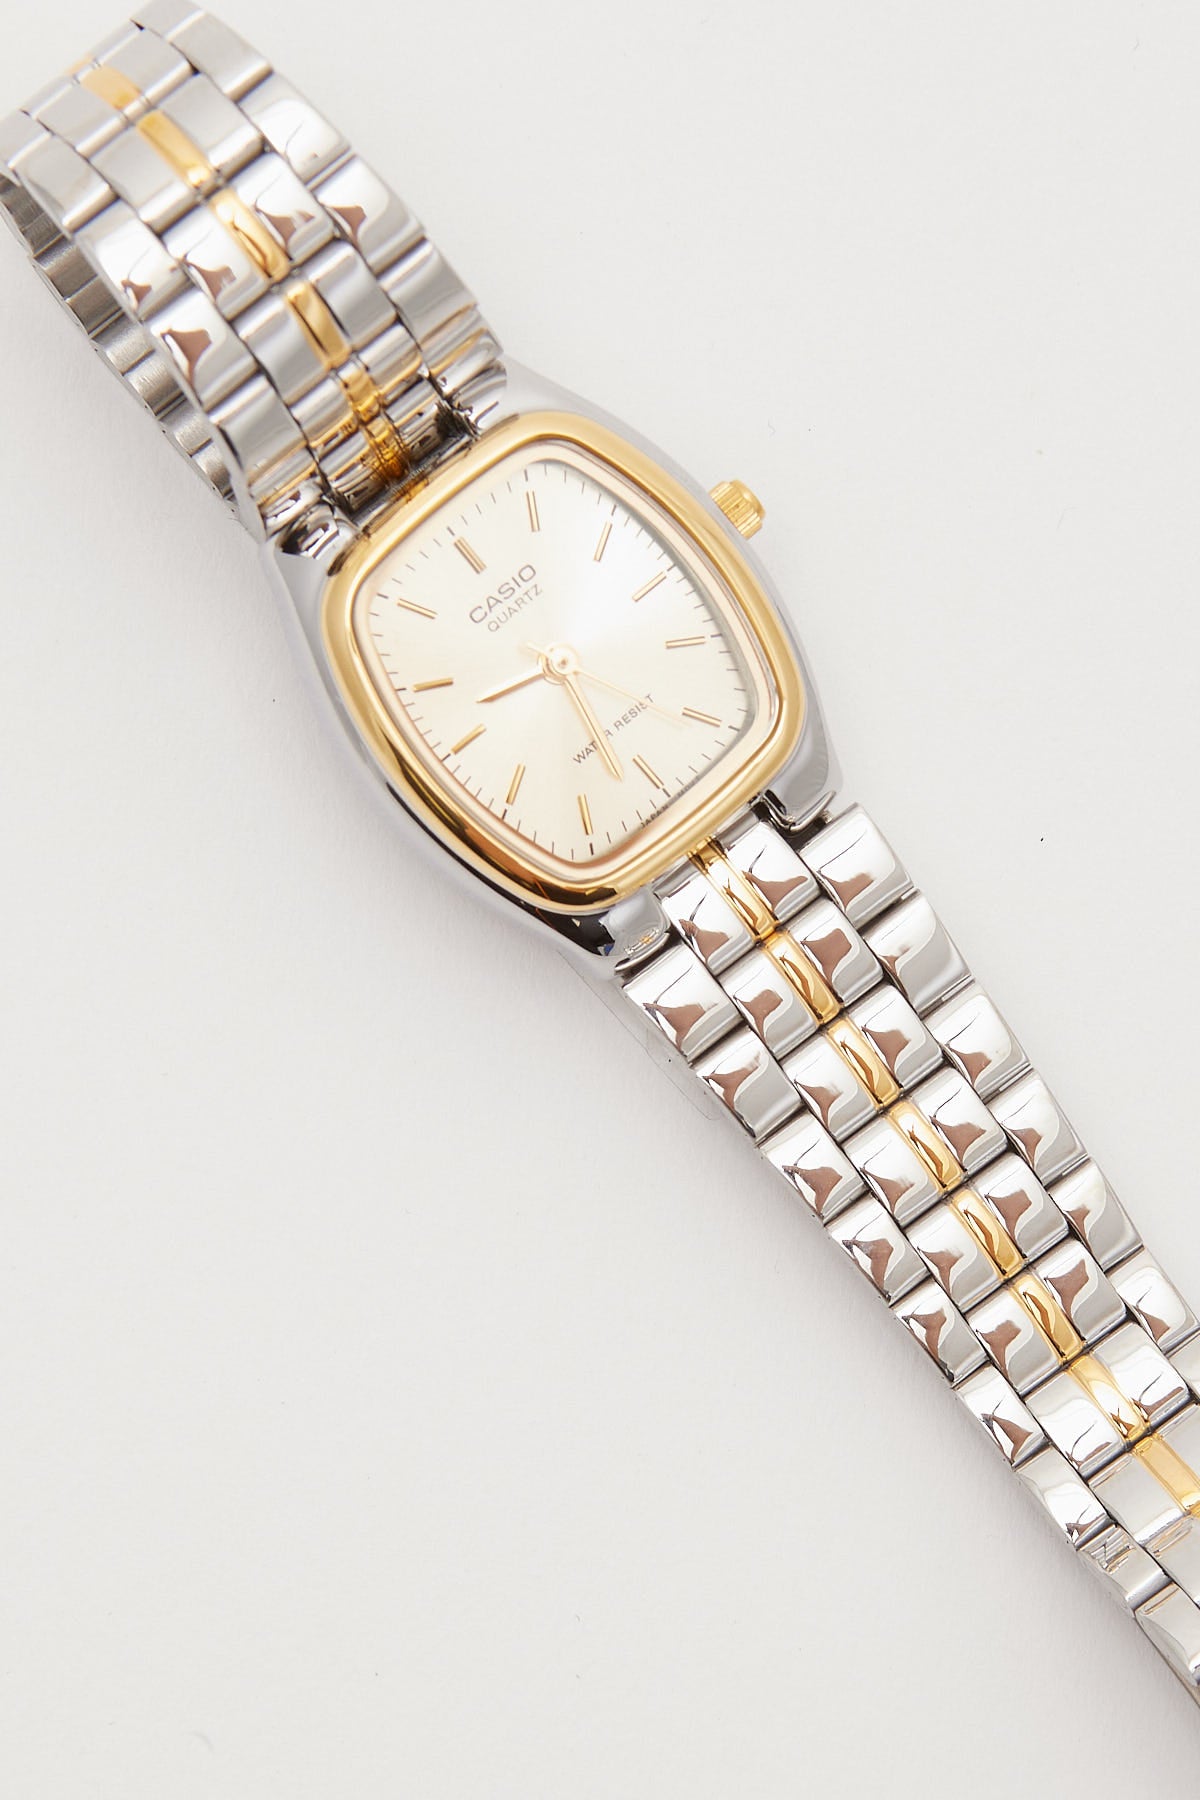 Casio LTP1169G-9A Ladies Analogue Watch Silver/Gold Duotone